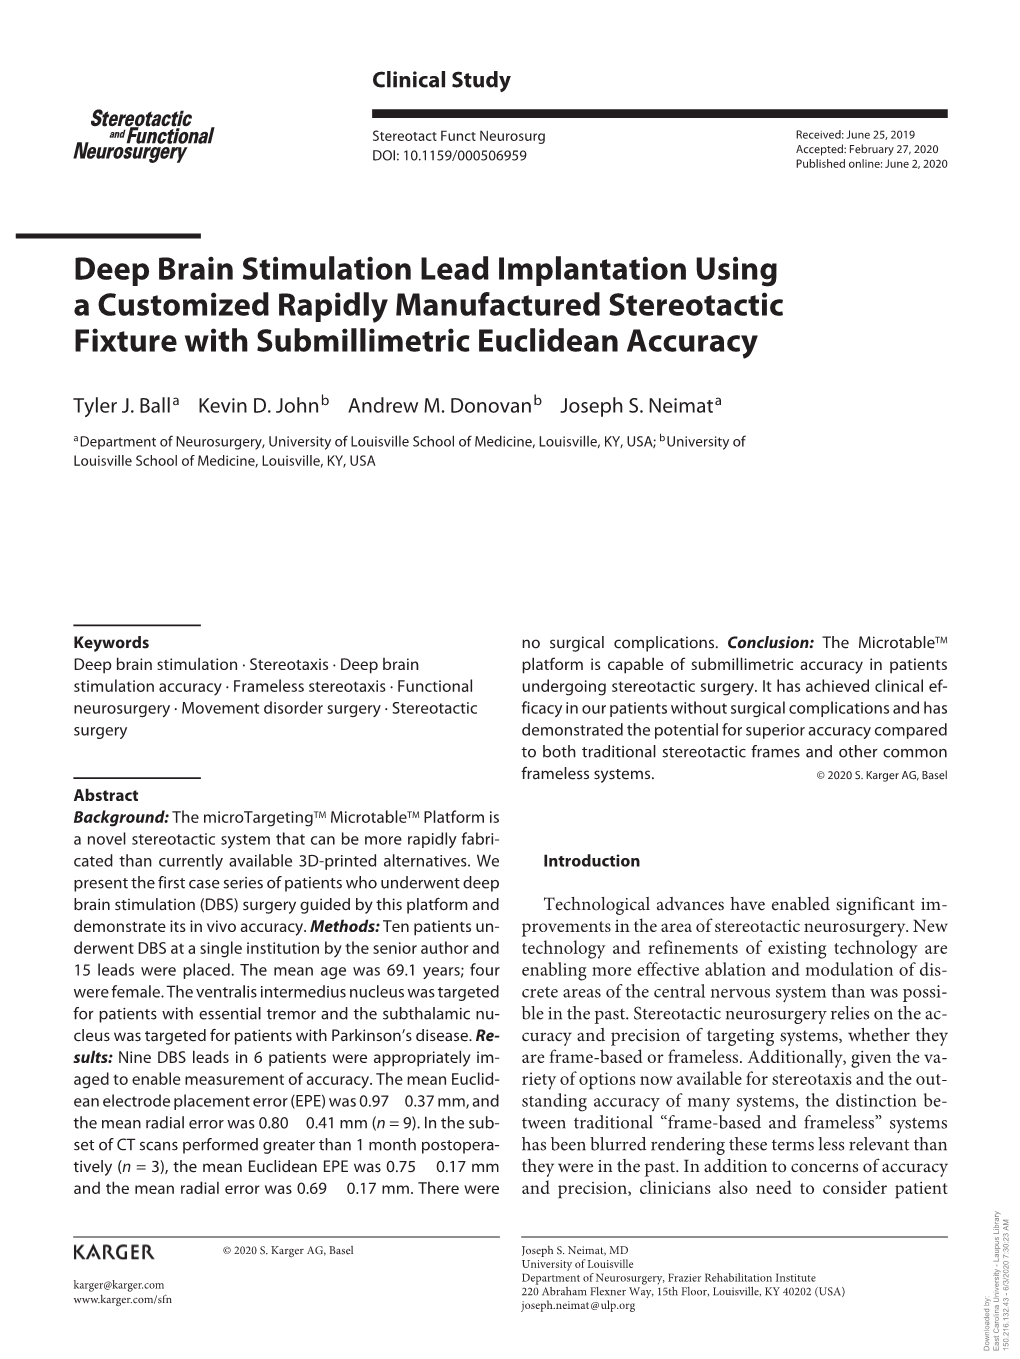 Deep Brain Stimulation Lead Implantation Using a Customized Rapidly Manufactured Stereotactic Fixture with Submillimetric Euclidean Accuracy